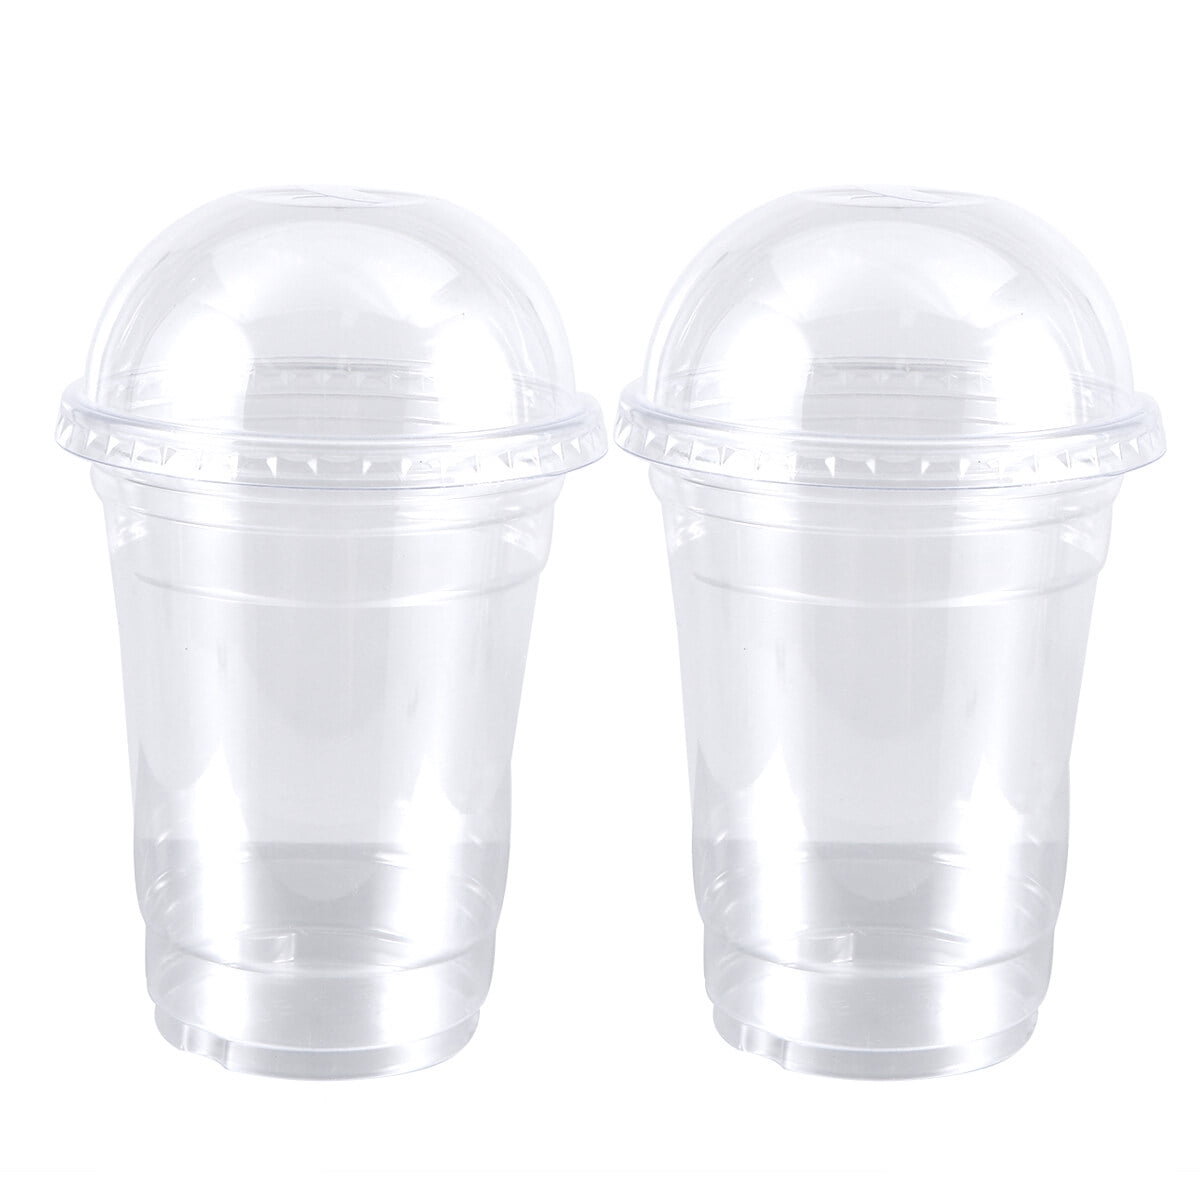 4 Free Clear Plastic Disposable Juice Cup With Dome Lid Mockup PSD Set -  Good Mockups